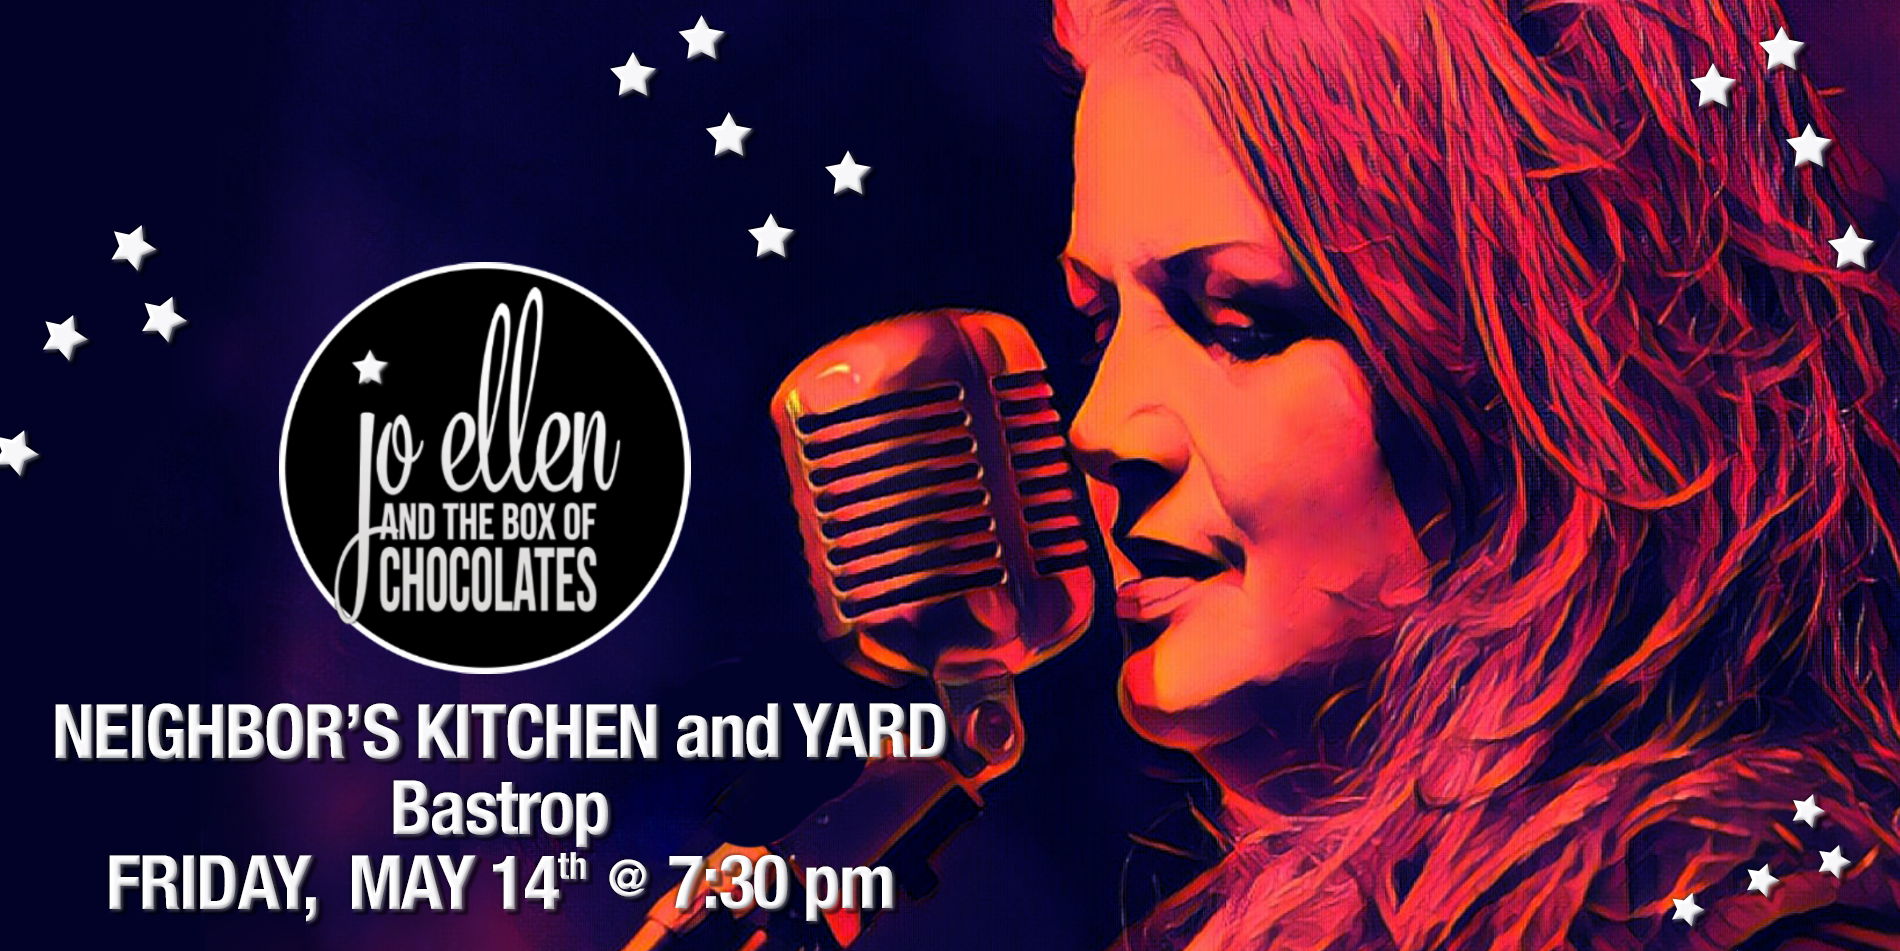 Jo Ellen and the Box of Chocolates at Neighbor's Kitchen and Yard promotional image